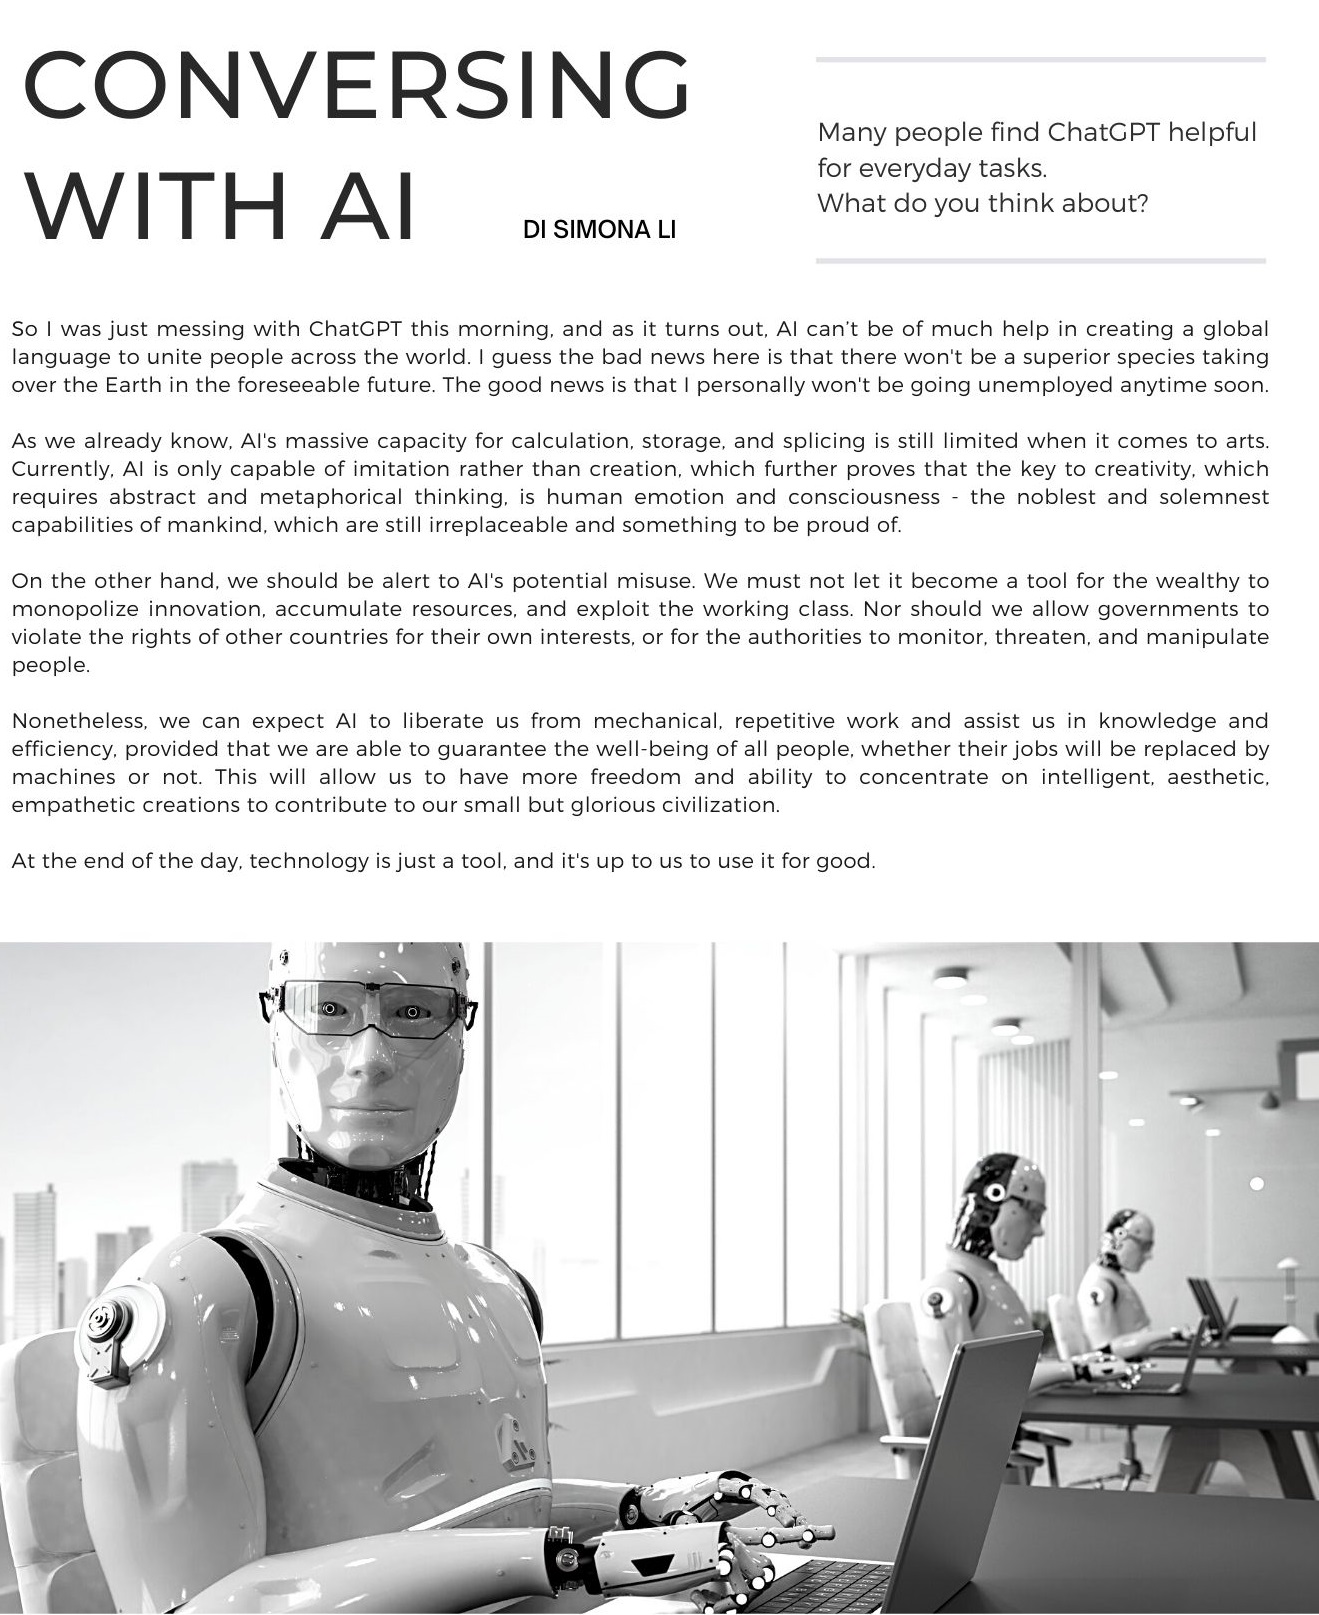 Conversing with AI di Simona Li: So I was just messing with ChatGPT this morning, and as it turns out, AI can’t be of much help in creating a global language to unite people across the world. I guess the bad news here is that there won't be a superior species taking over the Earth in the foreseeable future. The good news is that I personally won't be going unemployed anytime soon.    As we already know, AI's massive capacity for calculation, storage, and splicing is still limited when it comes to arts. Currently, AI is only capable of imitation rather than creation, which further proves that the key to creativity, which requires abstract and metaphorical thinking, is human emotion and consciousness - the noblest and solemnest capabilities of mankind, which are still irreplaceable and something to be proud of.    On the other hand, we should be alert to AI's potential misuse. We must not let it become a tool for the wealthy to monopolize innovation, accumulate resources, and exploit the working class. Nor should we allow governments to violate the rights of other countries for their own interests, or for the authorities to monitor, threaten, and manipulate people.    Nonetheless, we can expect AI to liberate us from mechanical, repetitive work and assist us in knowledge and efficiency, provided that we are able to guarantee the well-being of all people, whether their jobs will be replaced by machines or not. This will allow us to have more freedom and ability to concentrate on intelligent, aesthetic, empathetic creations to contribute to our small but glorious civilization.    At the end of the day, technology is just a tool, and it's up to us to use it for good. 